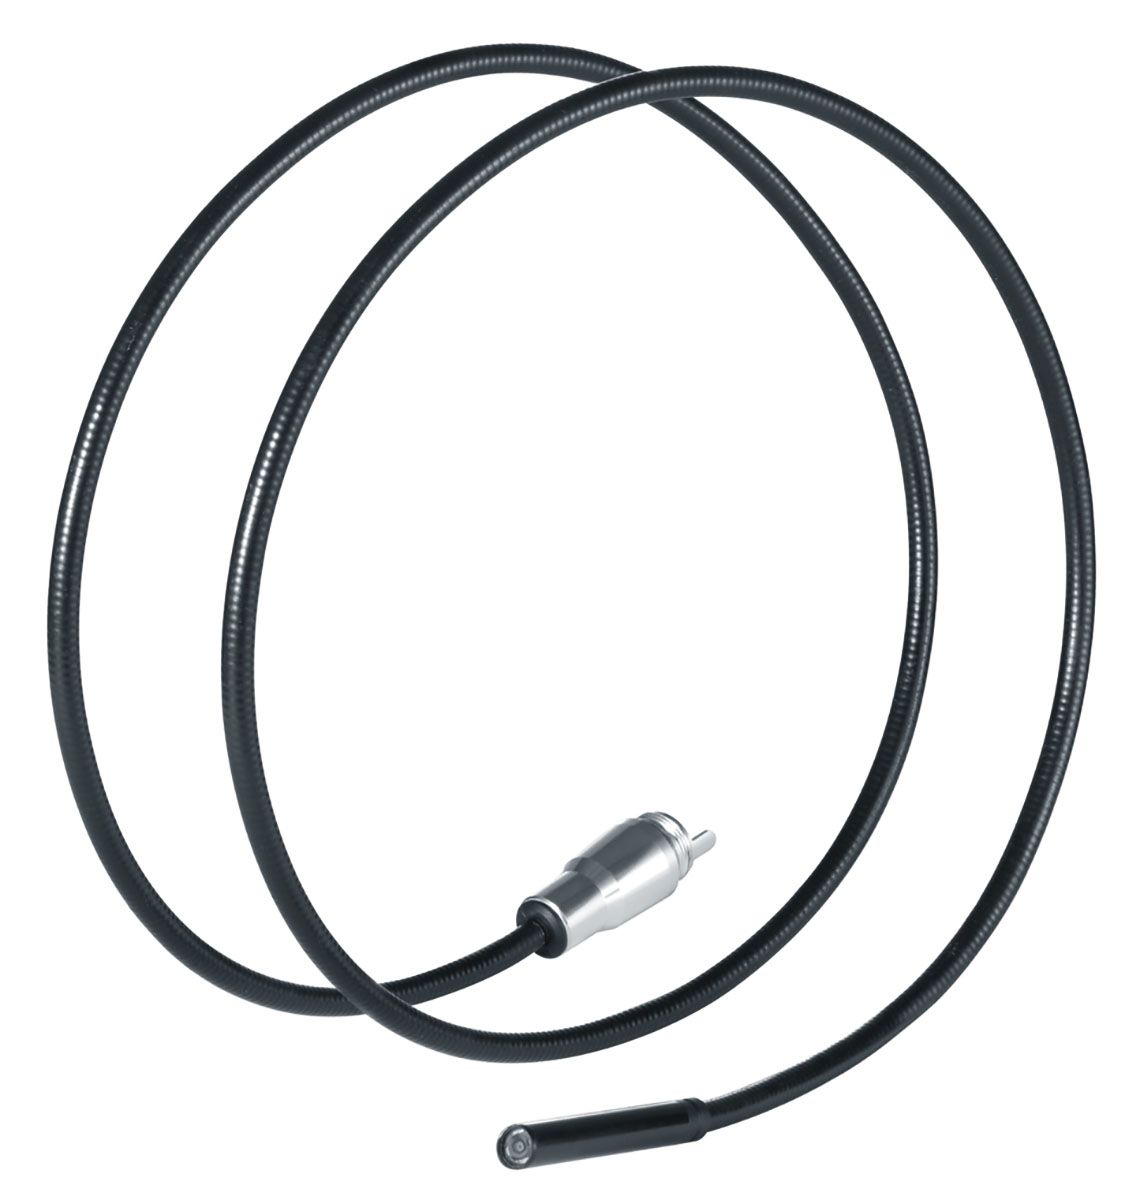 Laserliner 9mm probe Inspection Camera Extension Cable, 1.5m Probe Length, 640 x 480 (Camera) pixels Resolution, LED